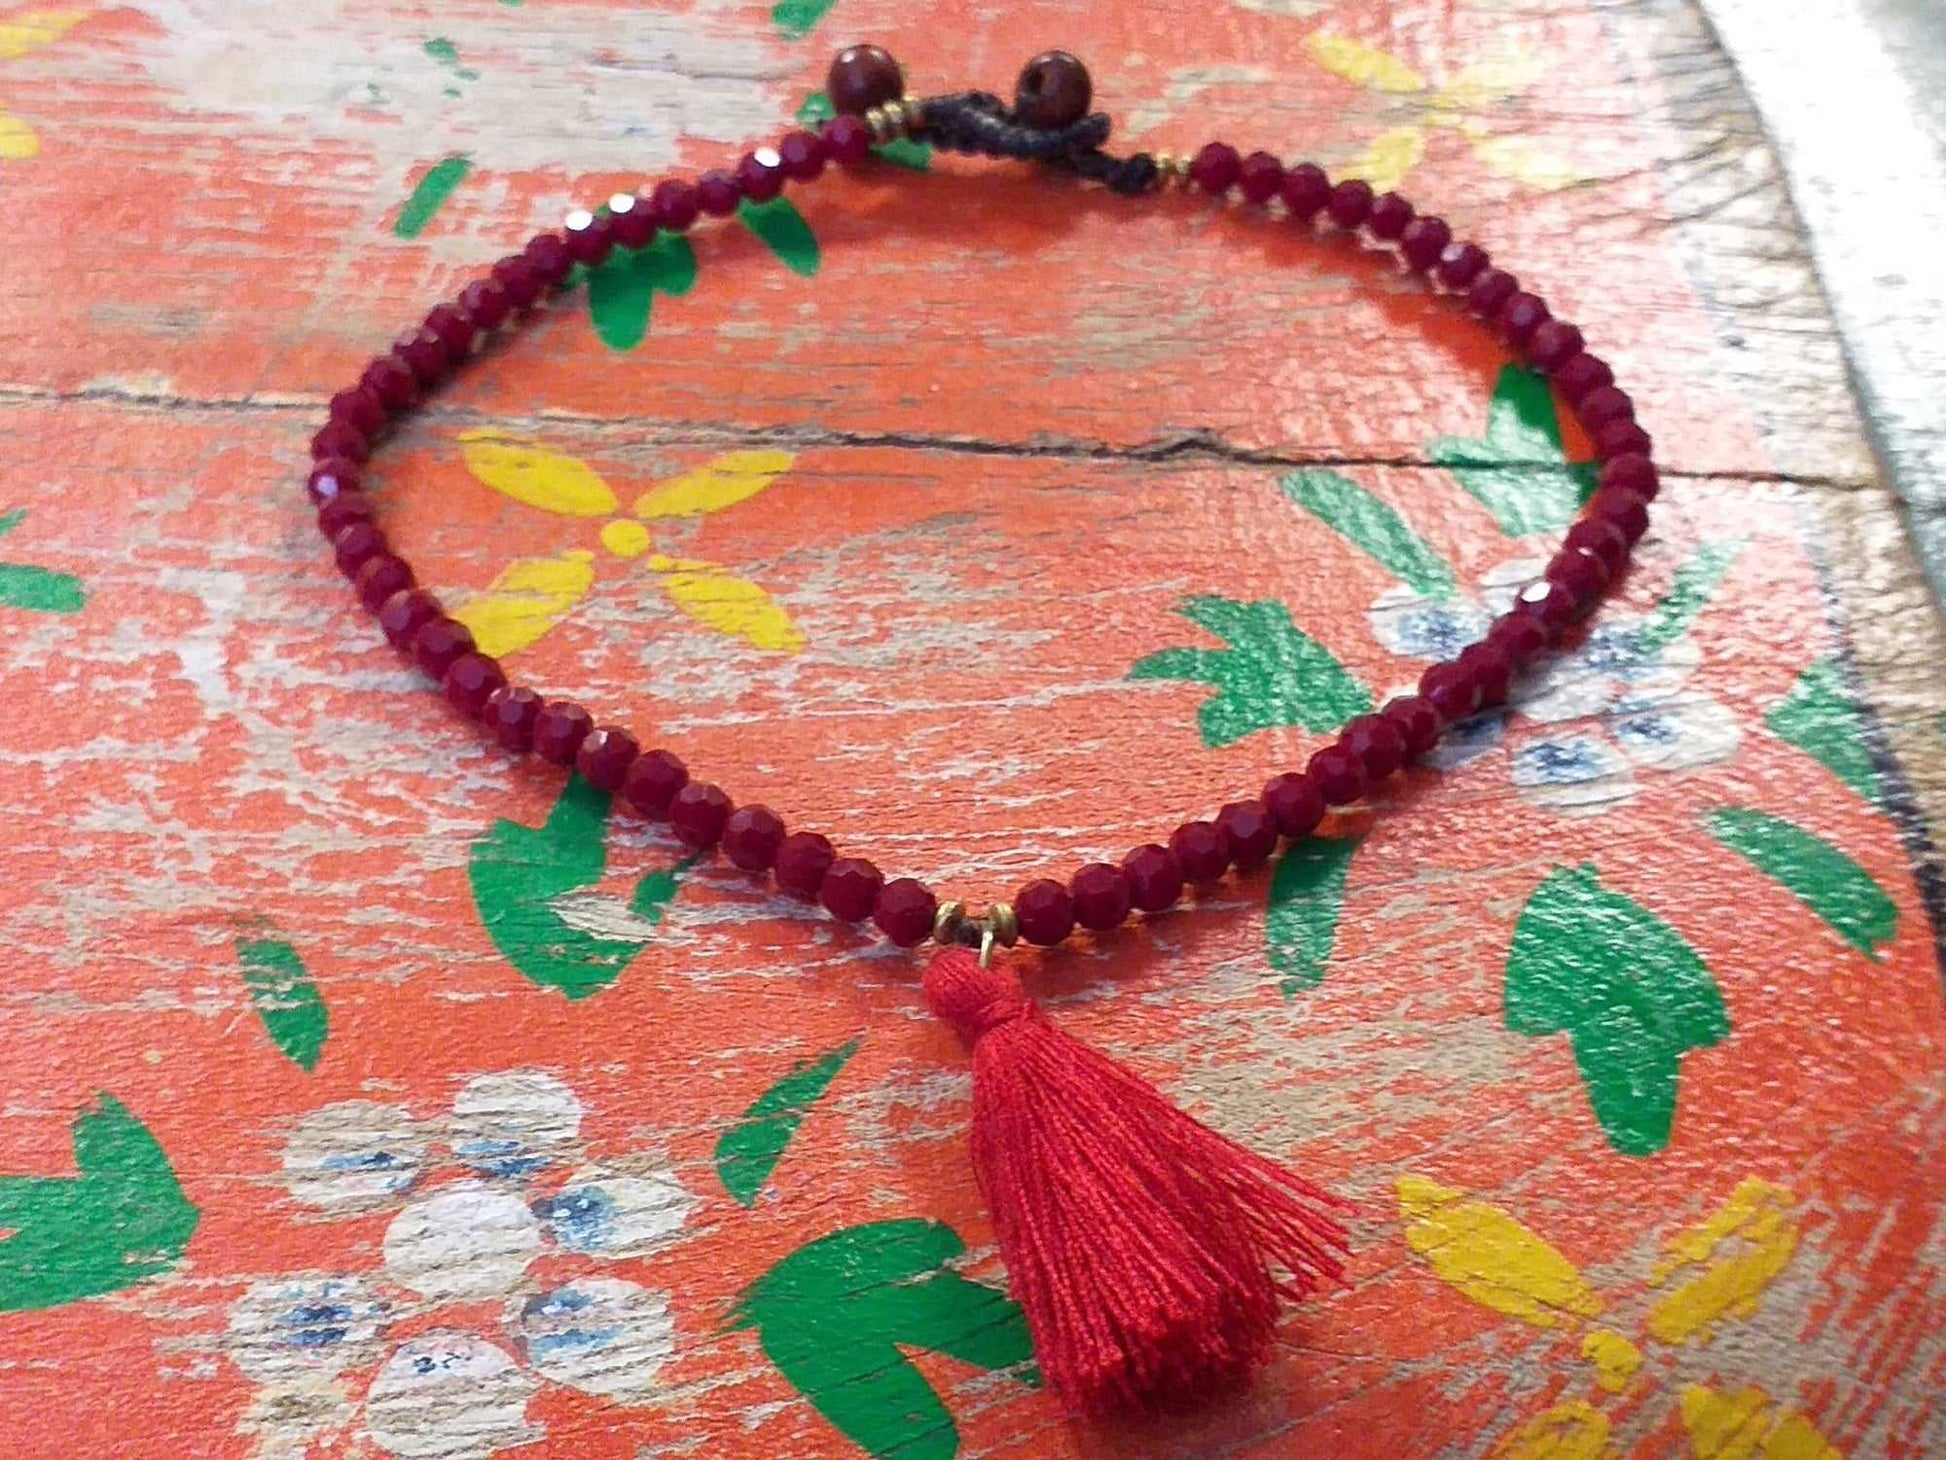 Bead and Tassel Anklet